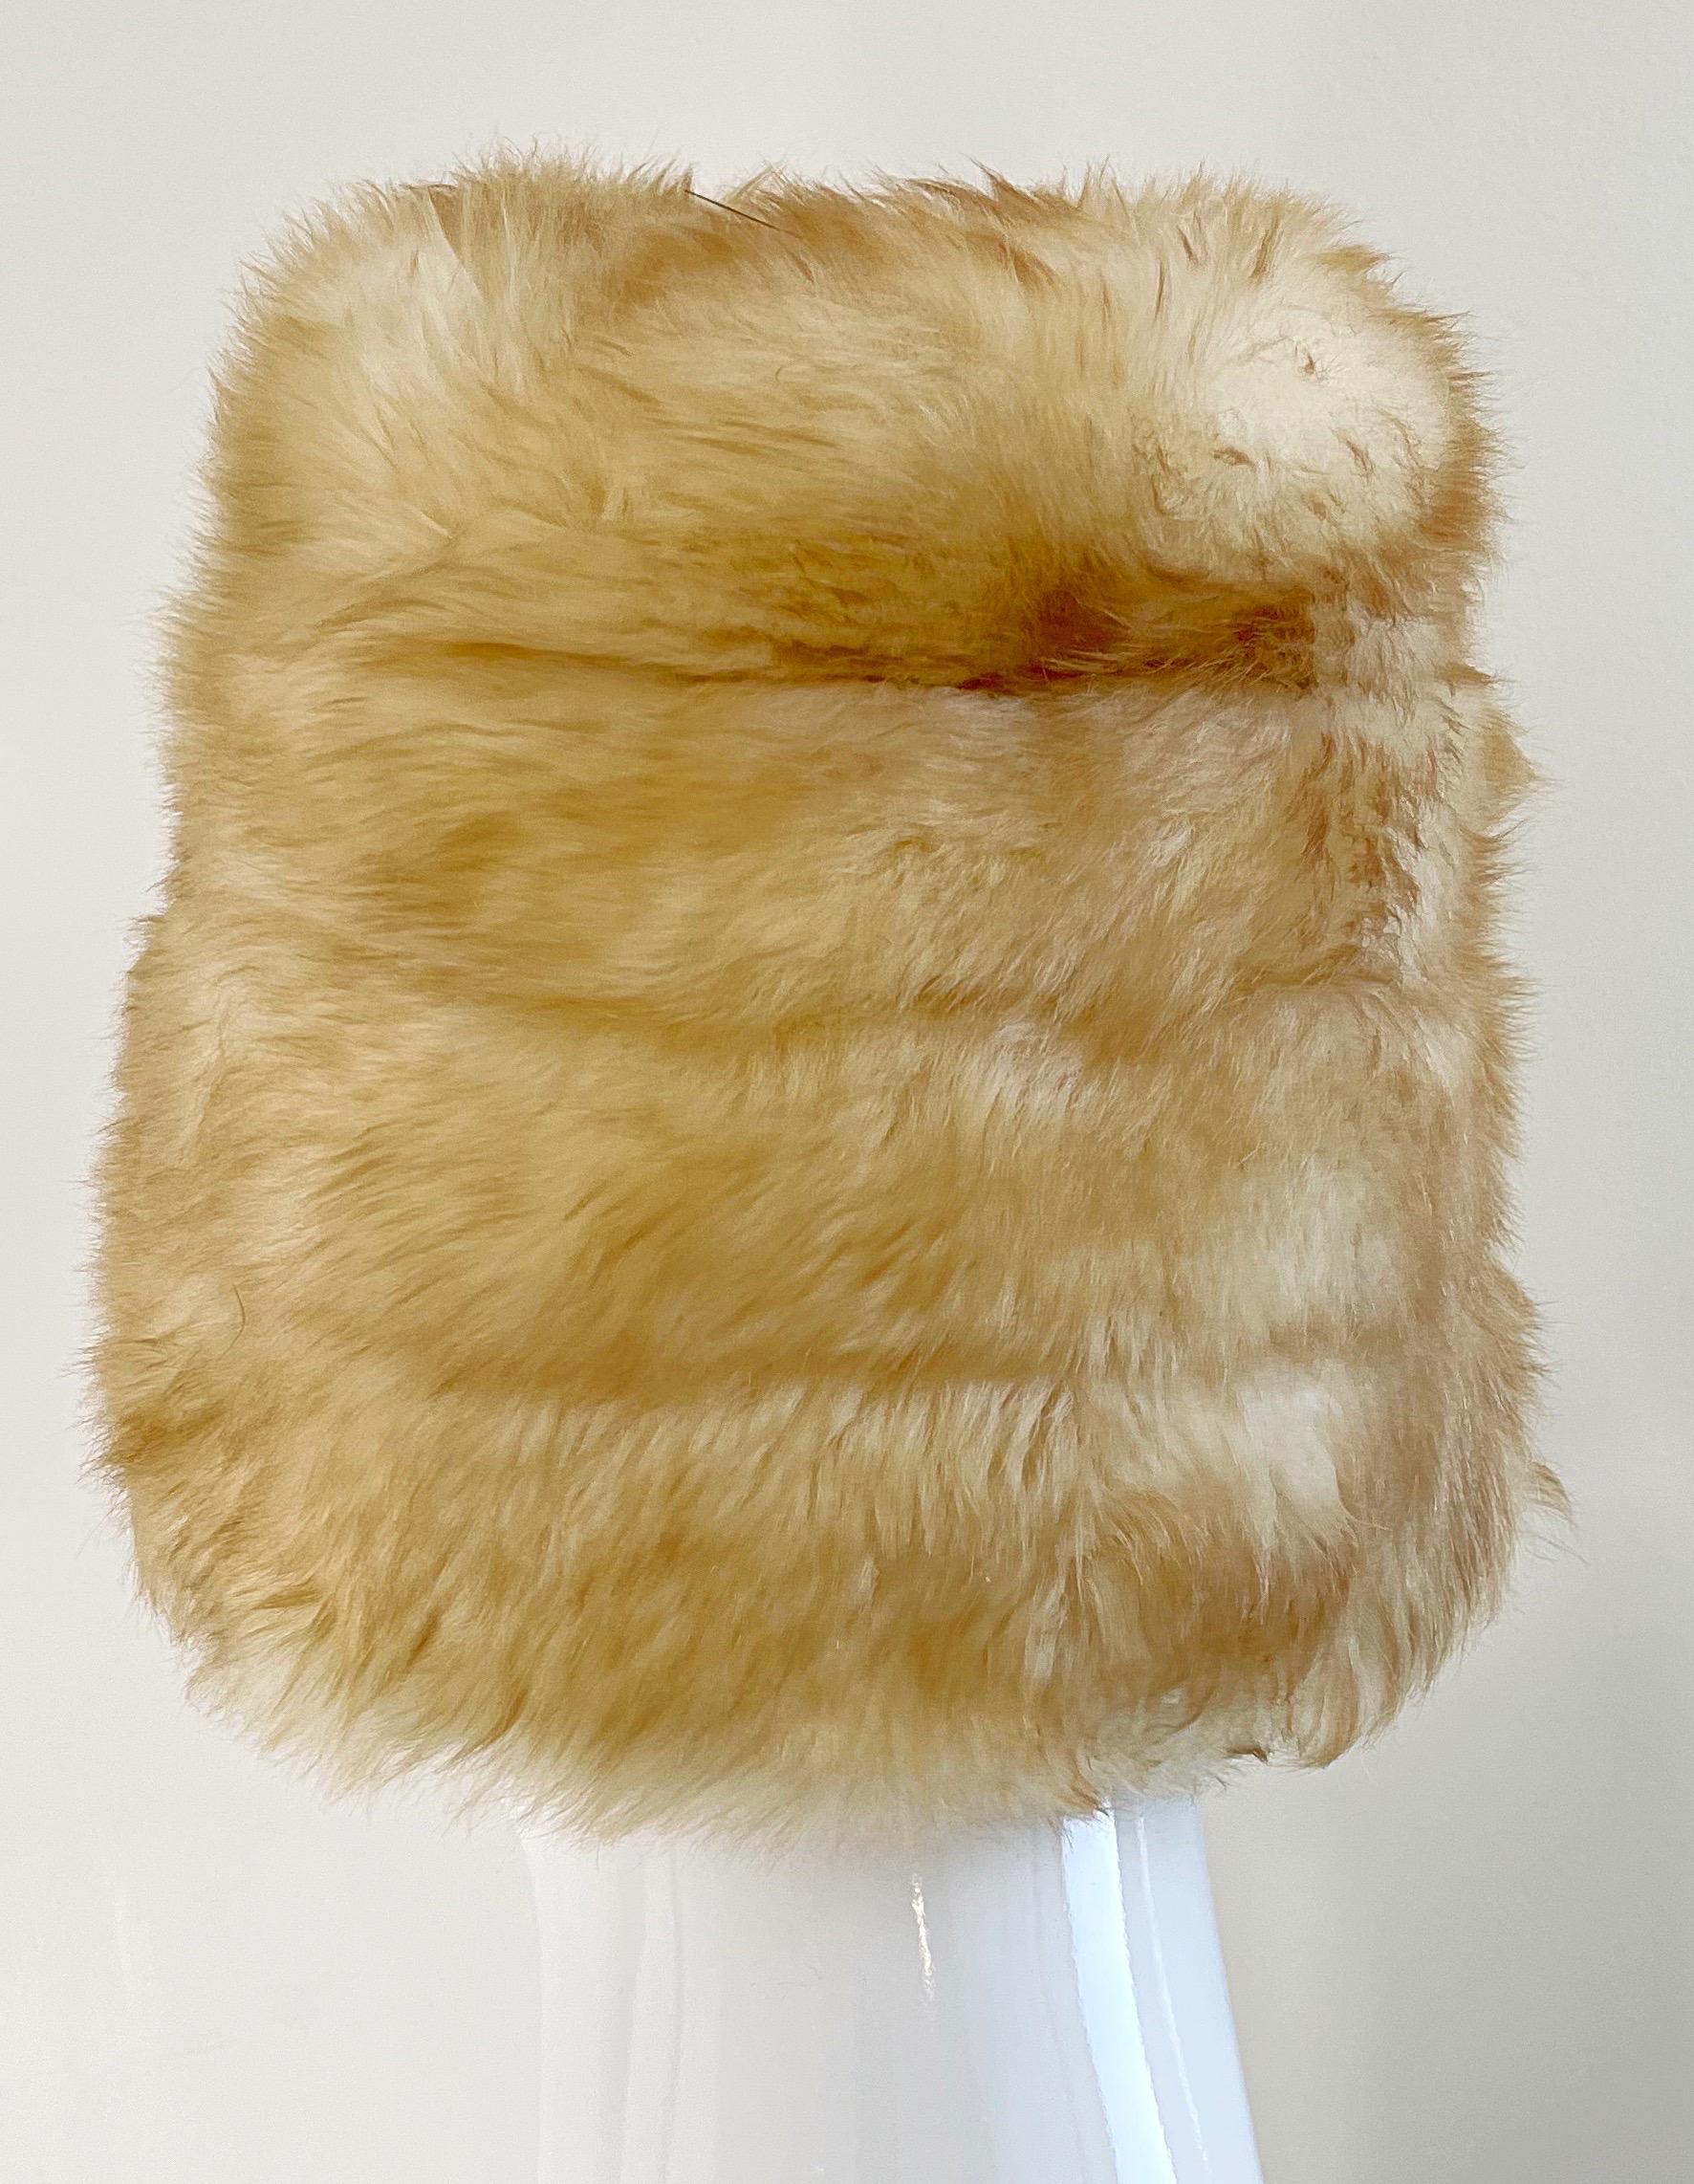 Yves Saint Laurent Fall 1976 Russian Collection Shearling Honey Tan Fur Hat 70s 9